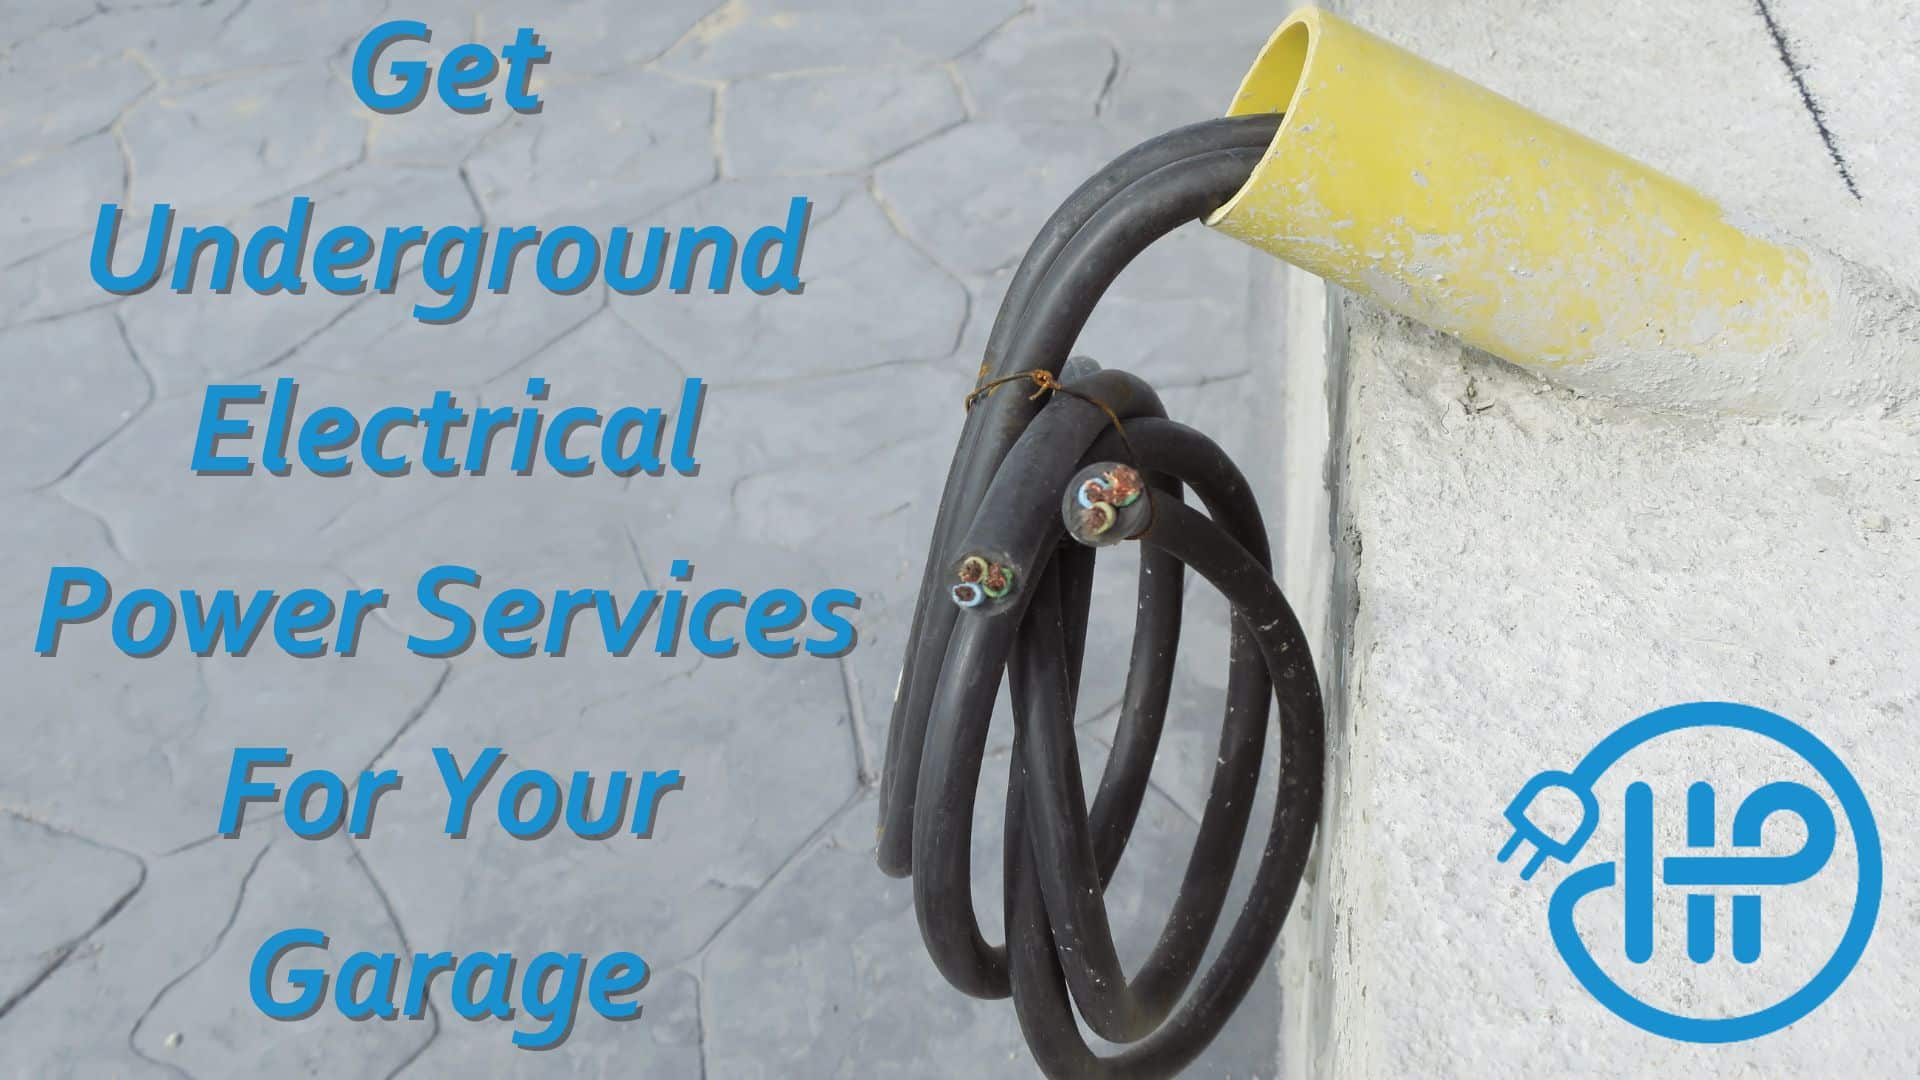 Get Underground Electrical Power Services For Your Garage